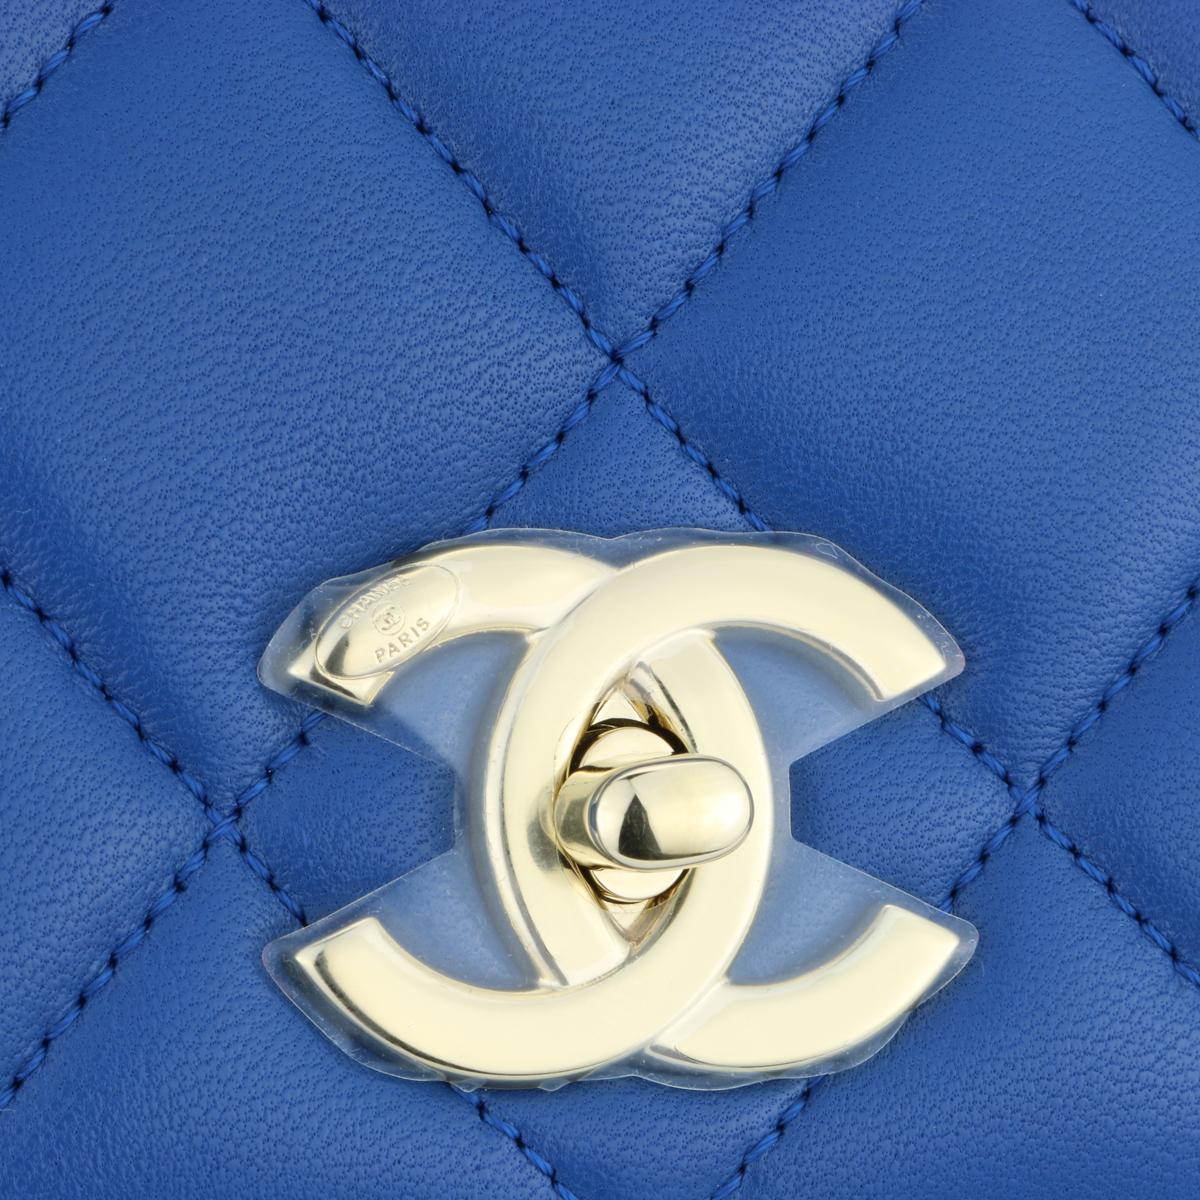 Authentic CHANEL Trendy CC Top Handle Bag Medium Blue Lambskin with Light Gold Hardware 2019.

This stunning bag is still in brand new condition with tag attached, the bag still holds its original shape, and the hardware is very shiny. Leather still